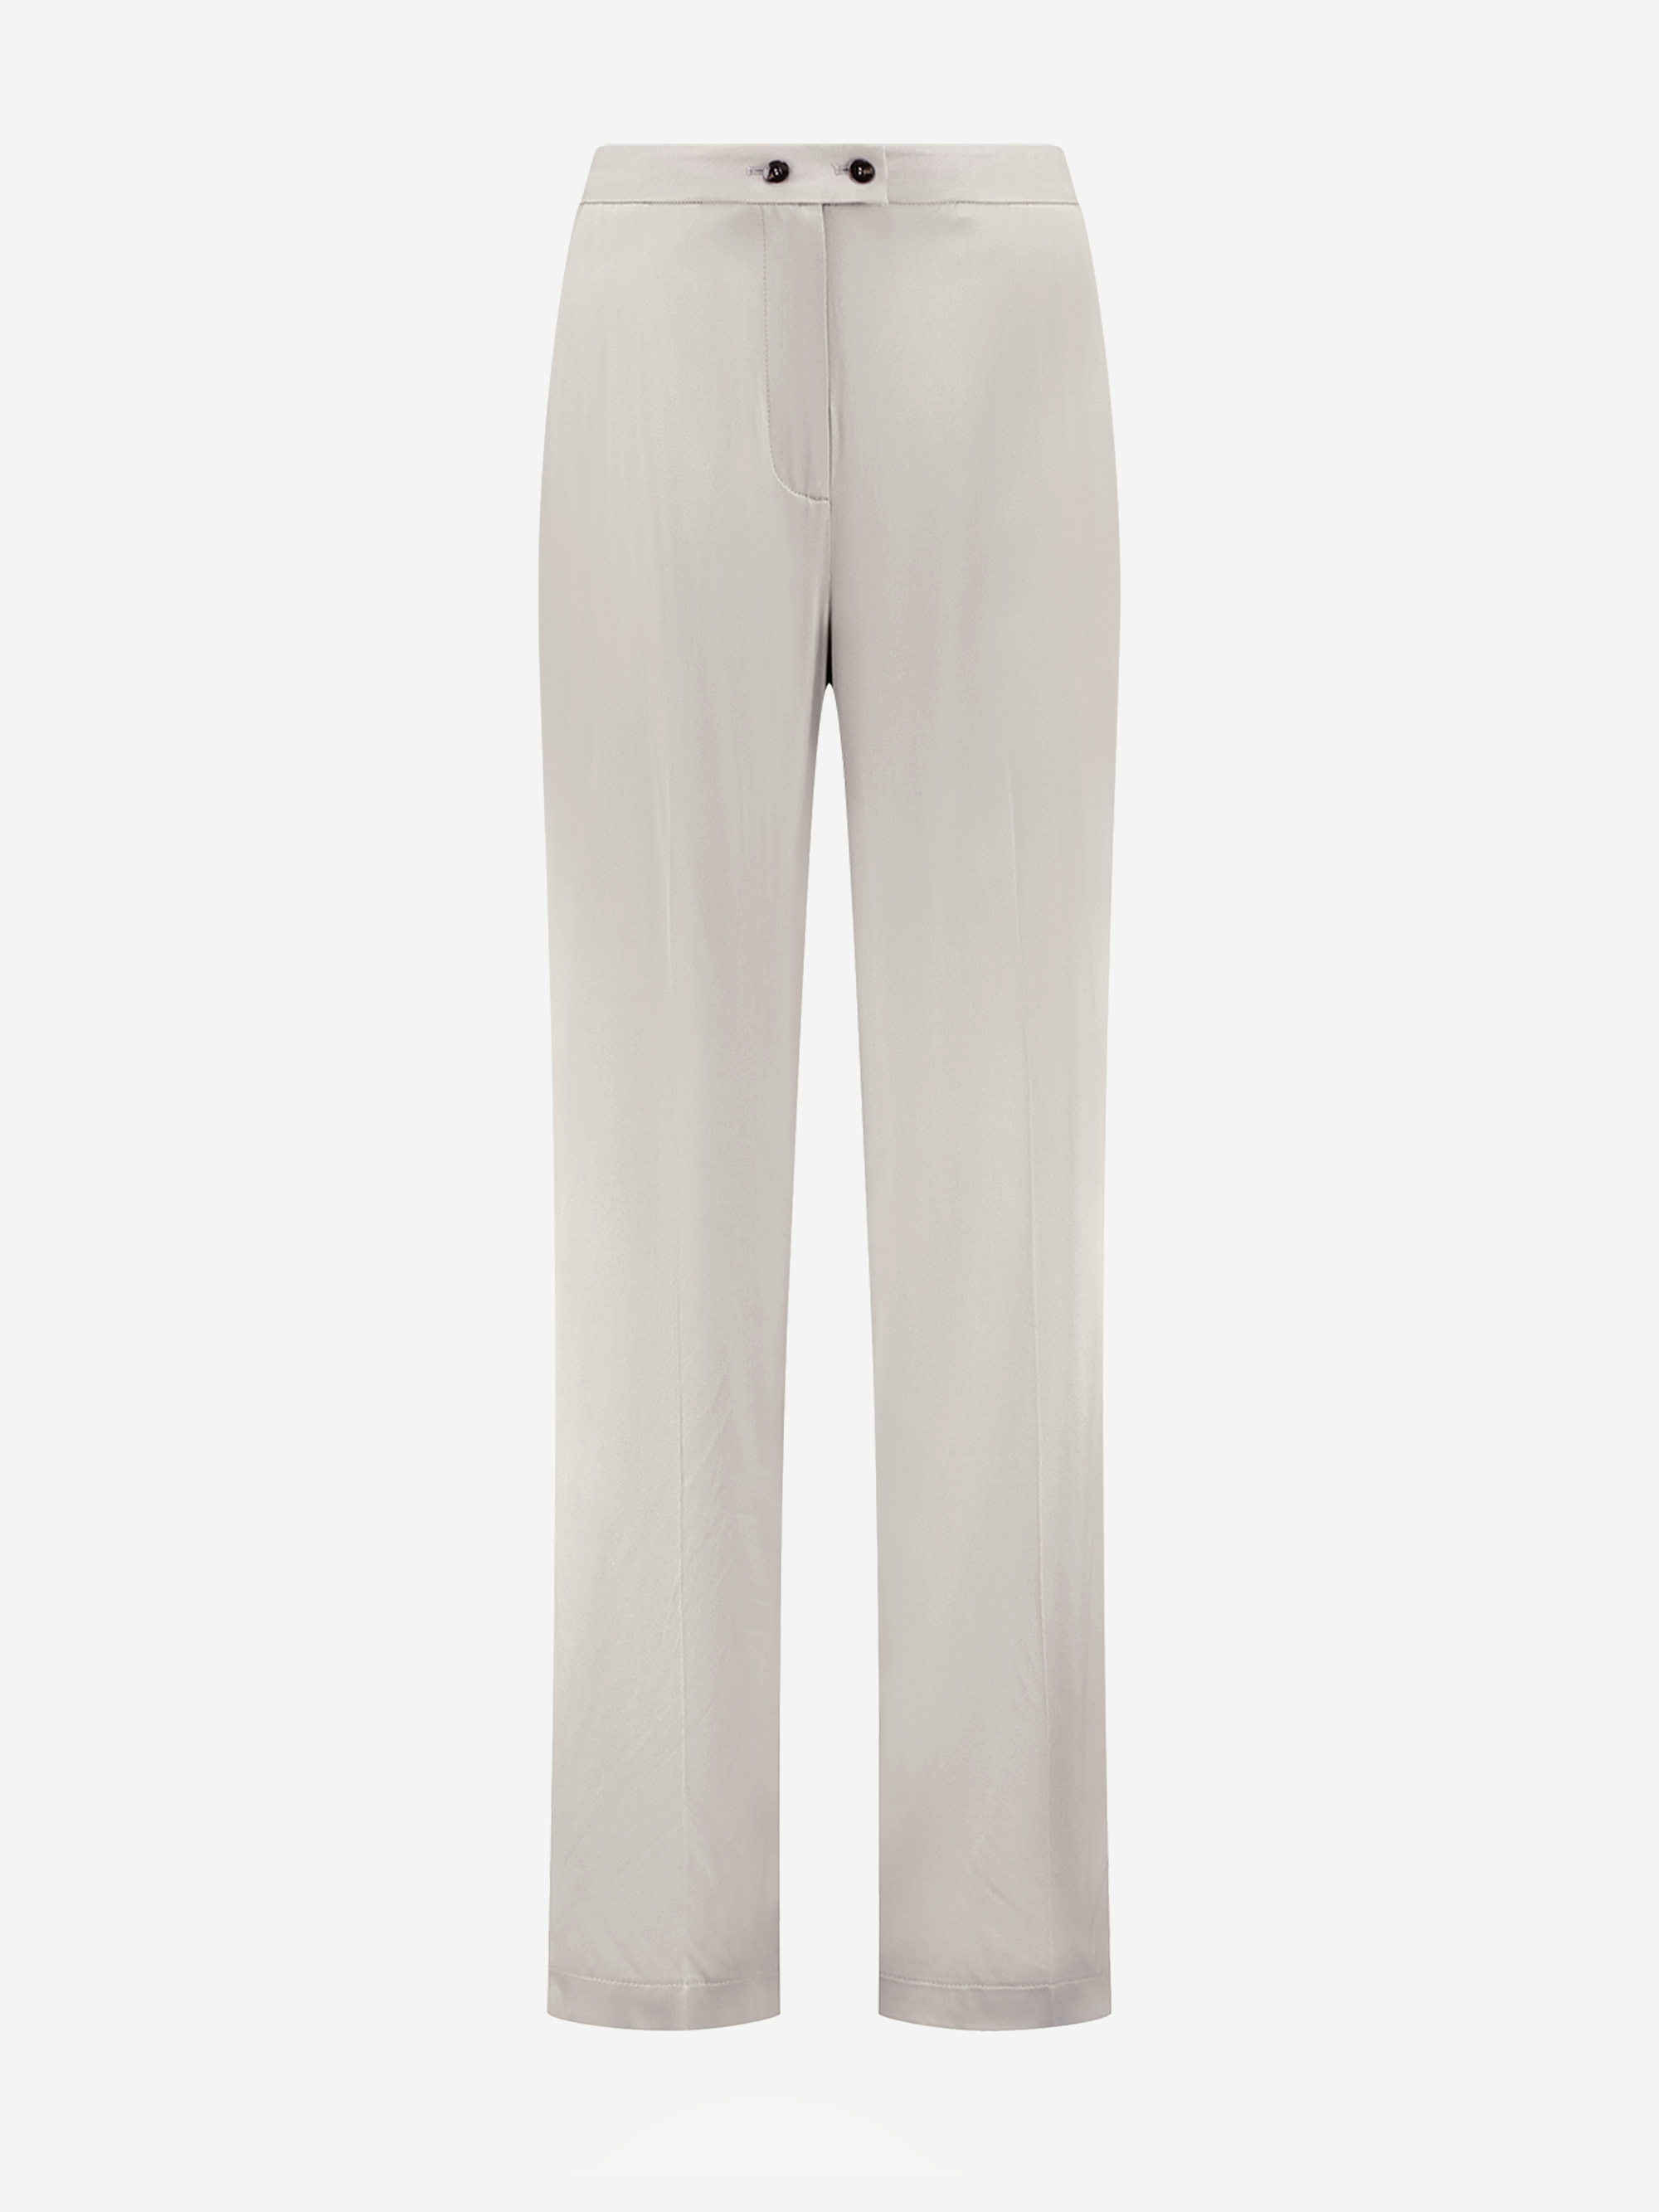 Straight satin look trousers with high rise